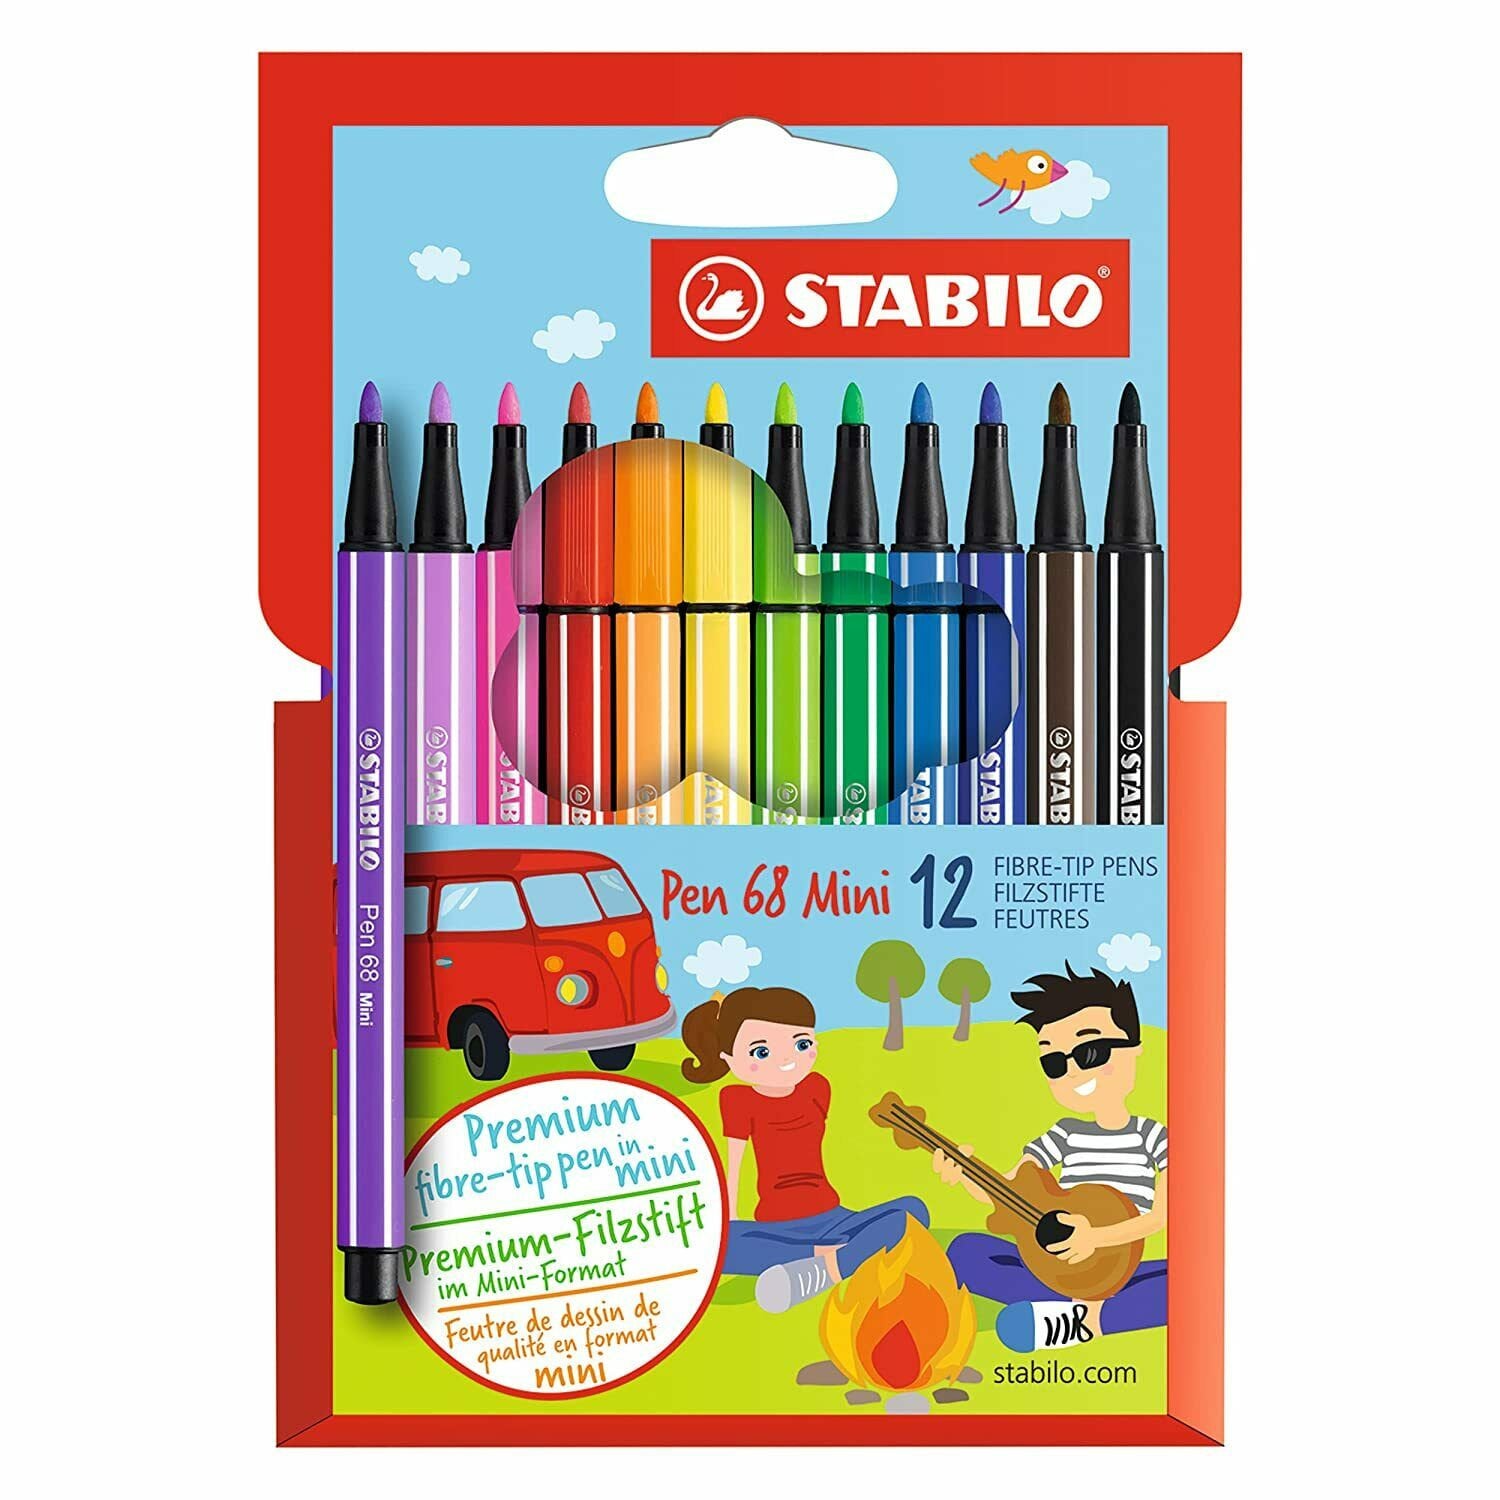 Stabilo Pen 68 Felt Tip Pens Tin x 20 Assorted Colours 50th year LIMITED  EDITION